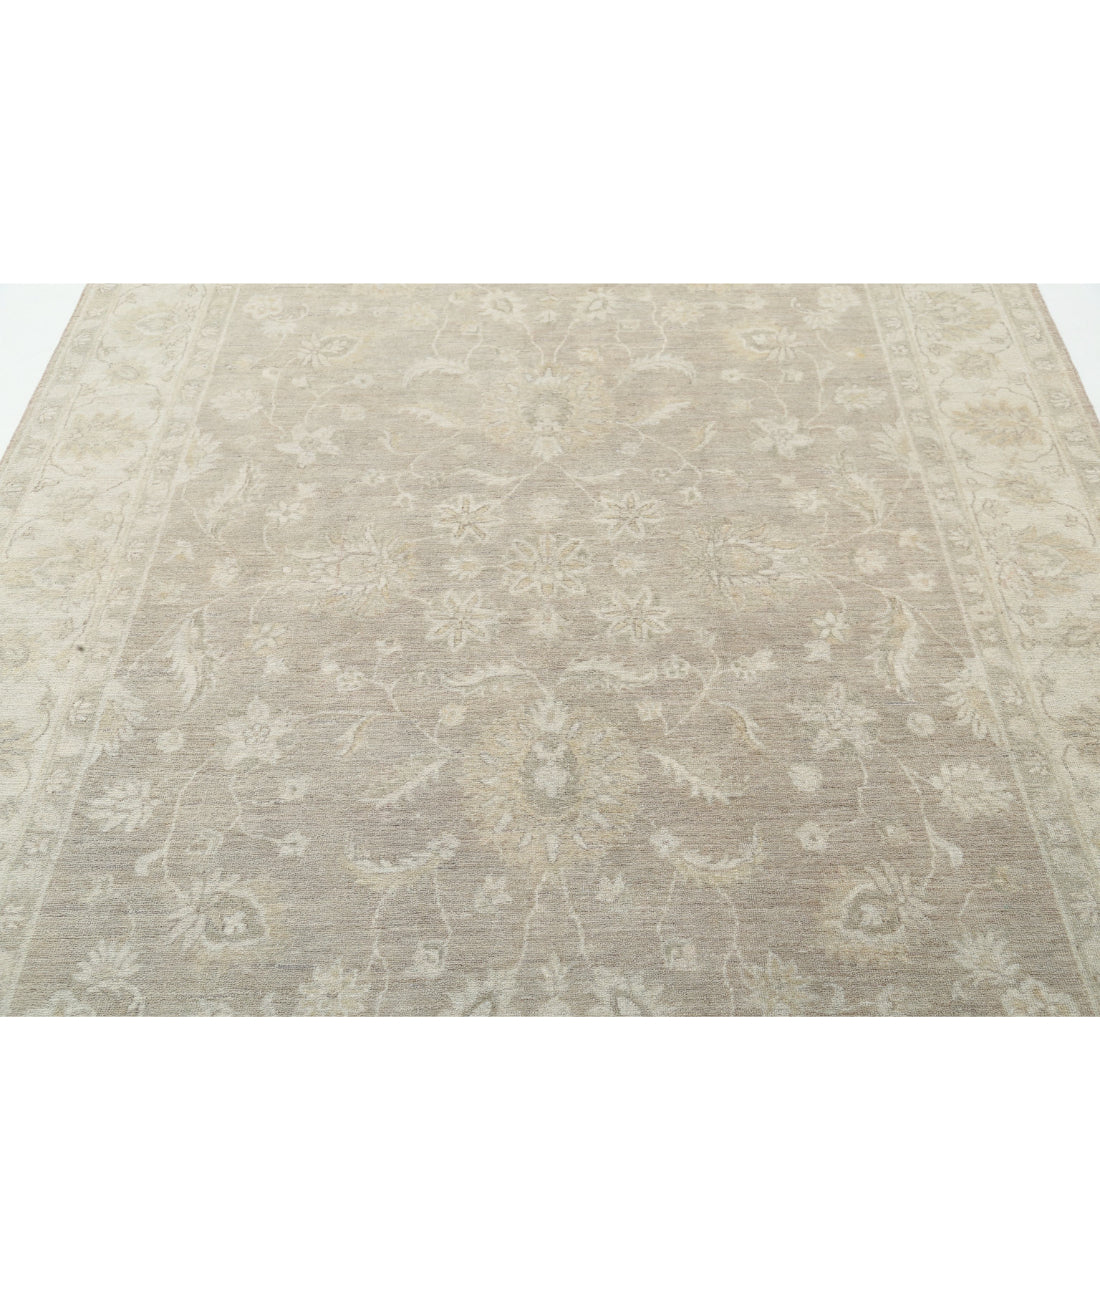 Hand Knotted Serenity Wool Rug - 6'4'' x 8'0'' 6'4'' x 8'0'' (190 X 240) / Taupe / Ivory